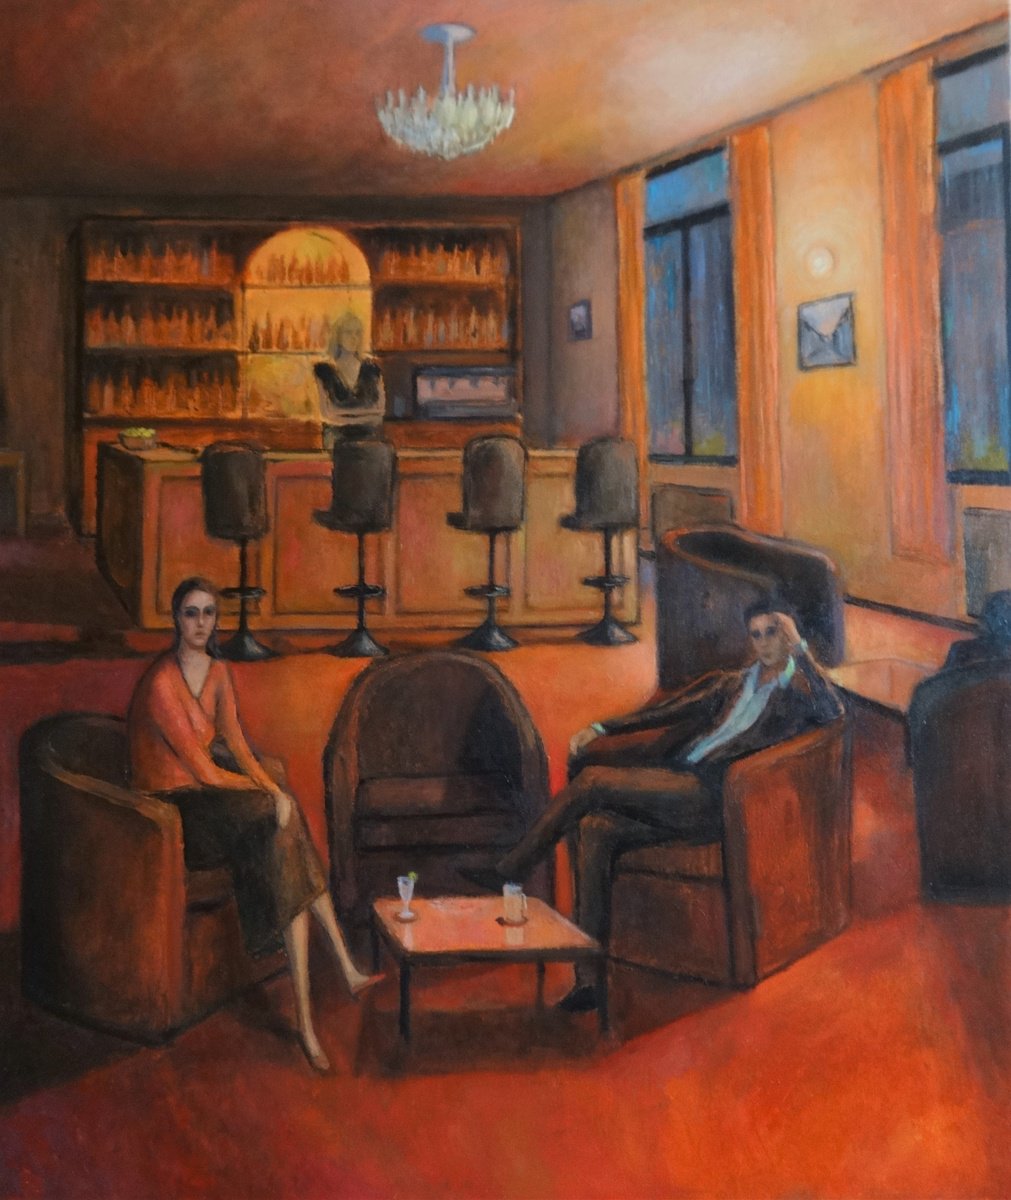 Evening in the lounge by Massimiliano Ligabue